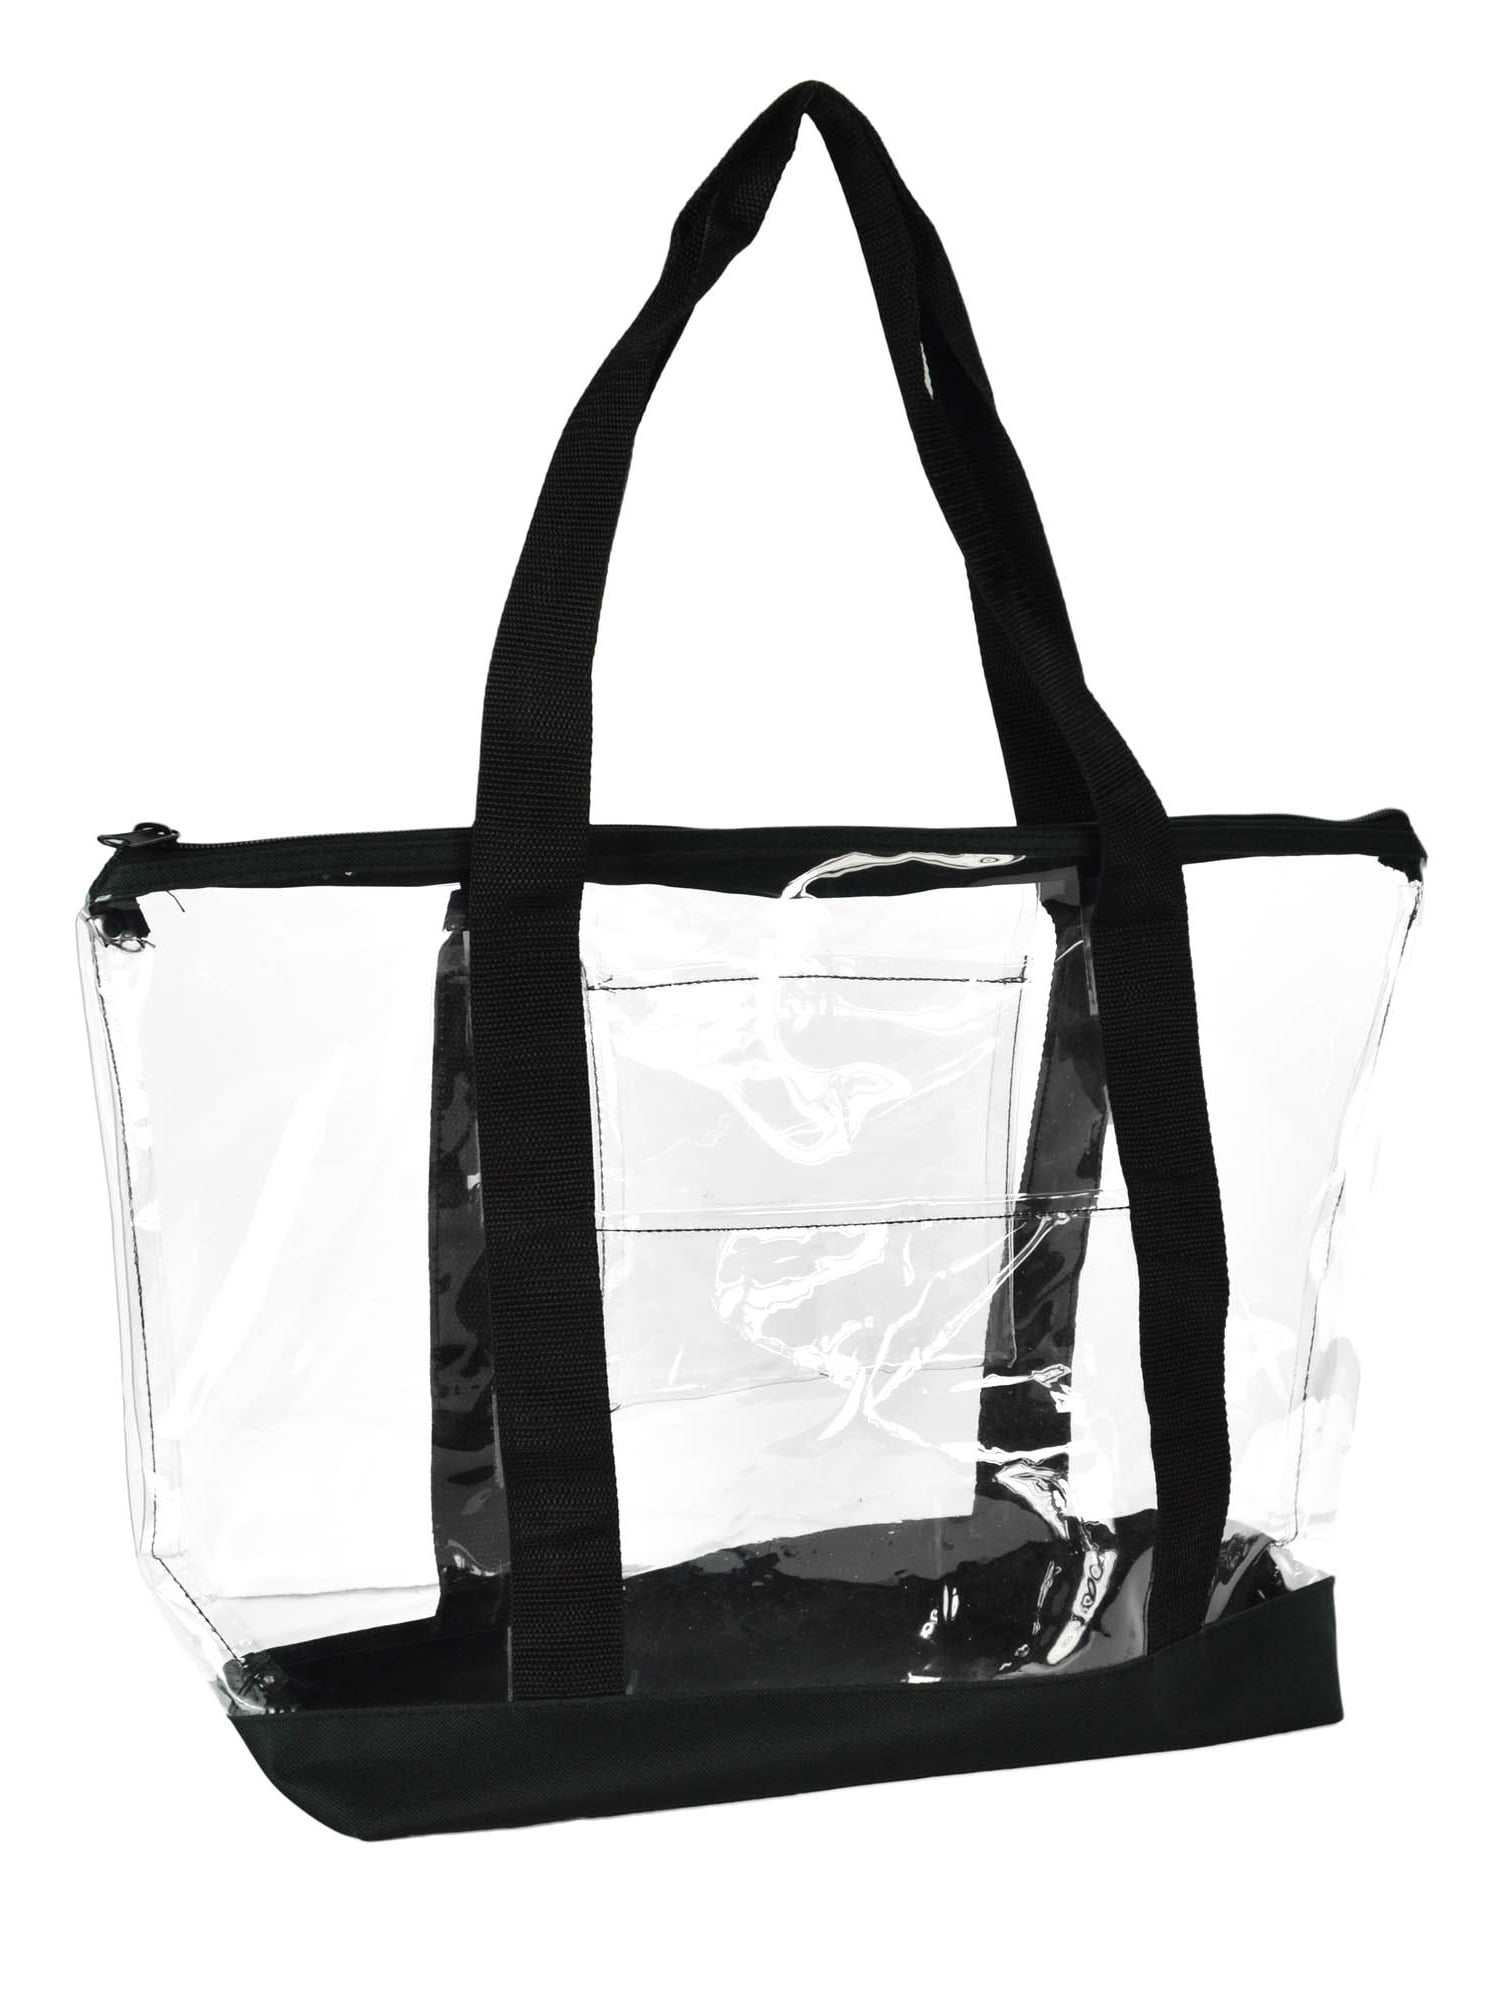 Juvale 2 Pack Clear Stadium Approved Tote Bags,12x6x12 Large Transparent Totes With Zippers,handles For Concerts,sporting Events,music